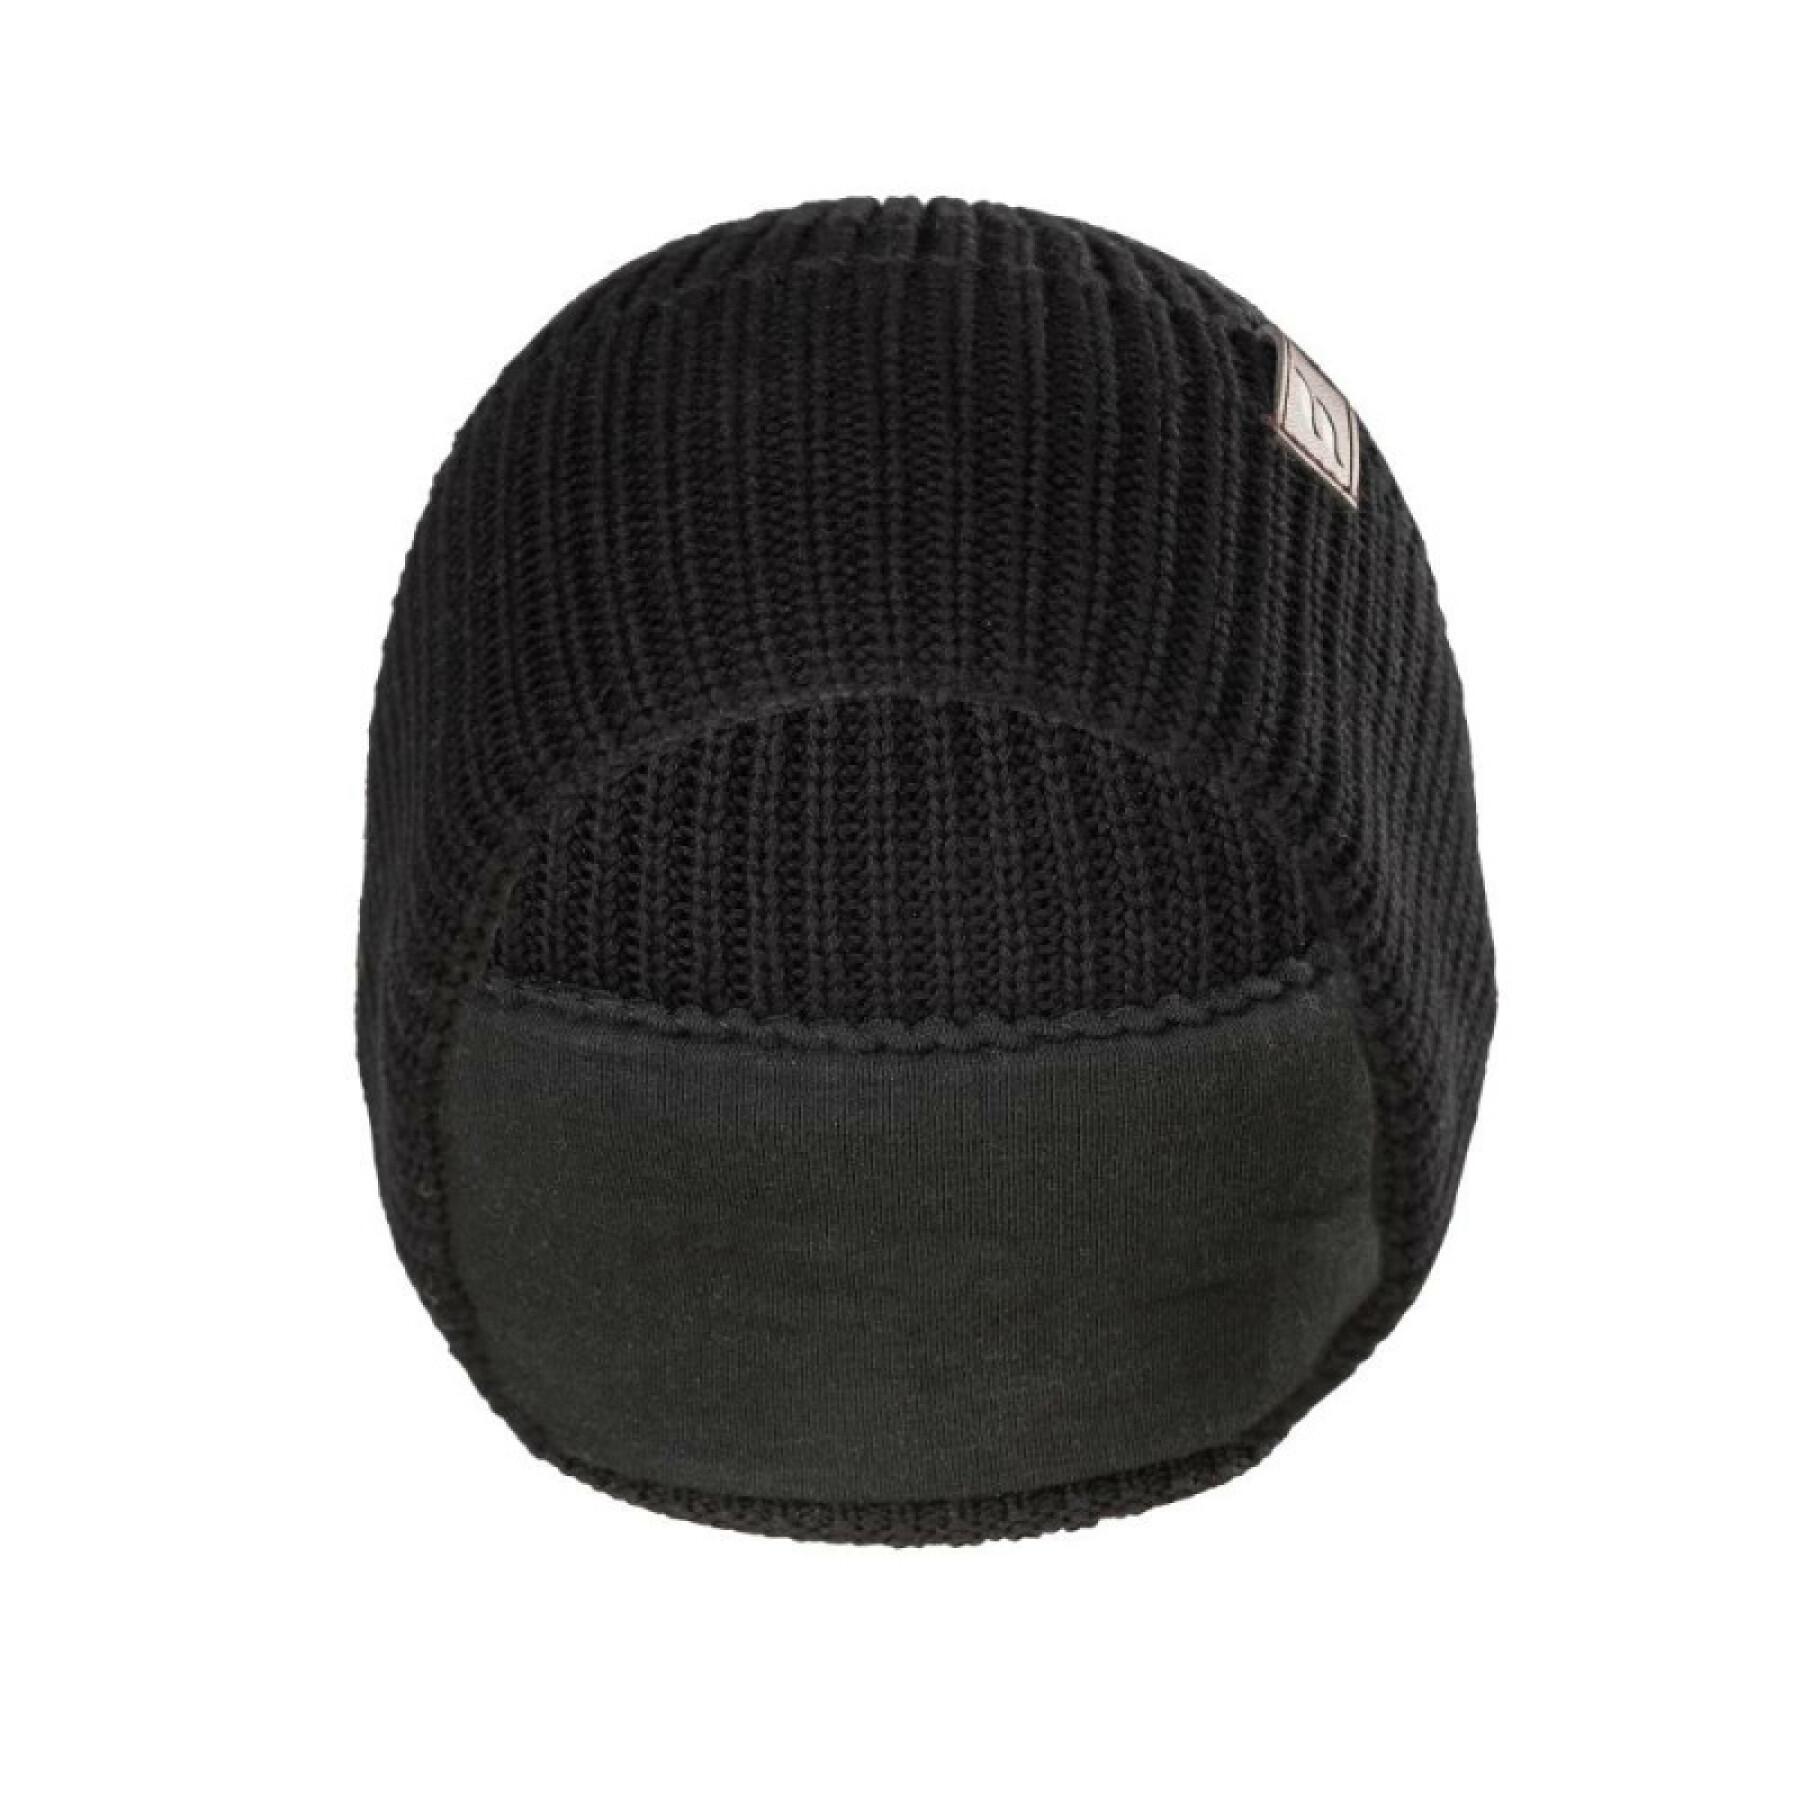 Cotton hat with lapel Back on Track Mason